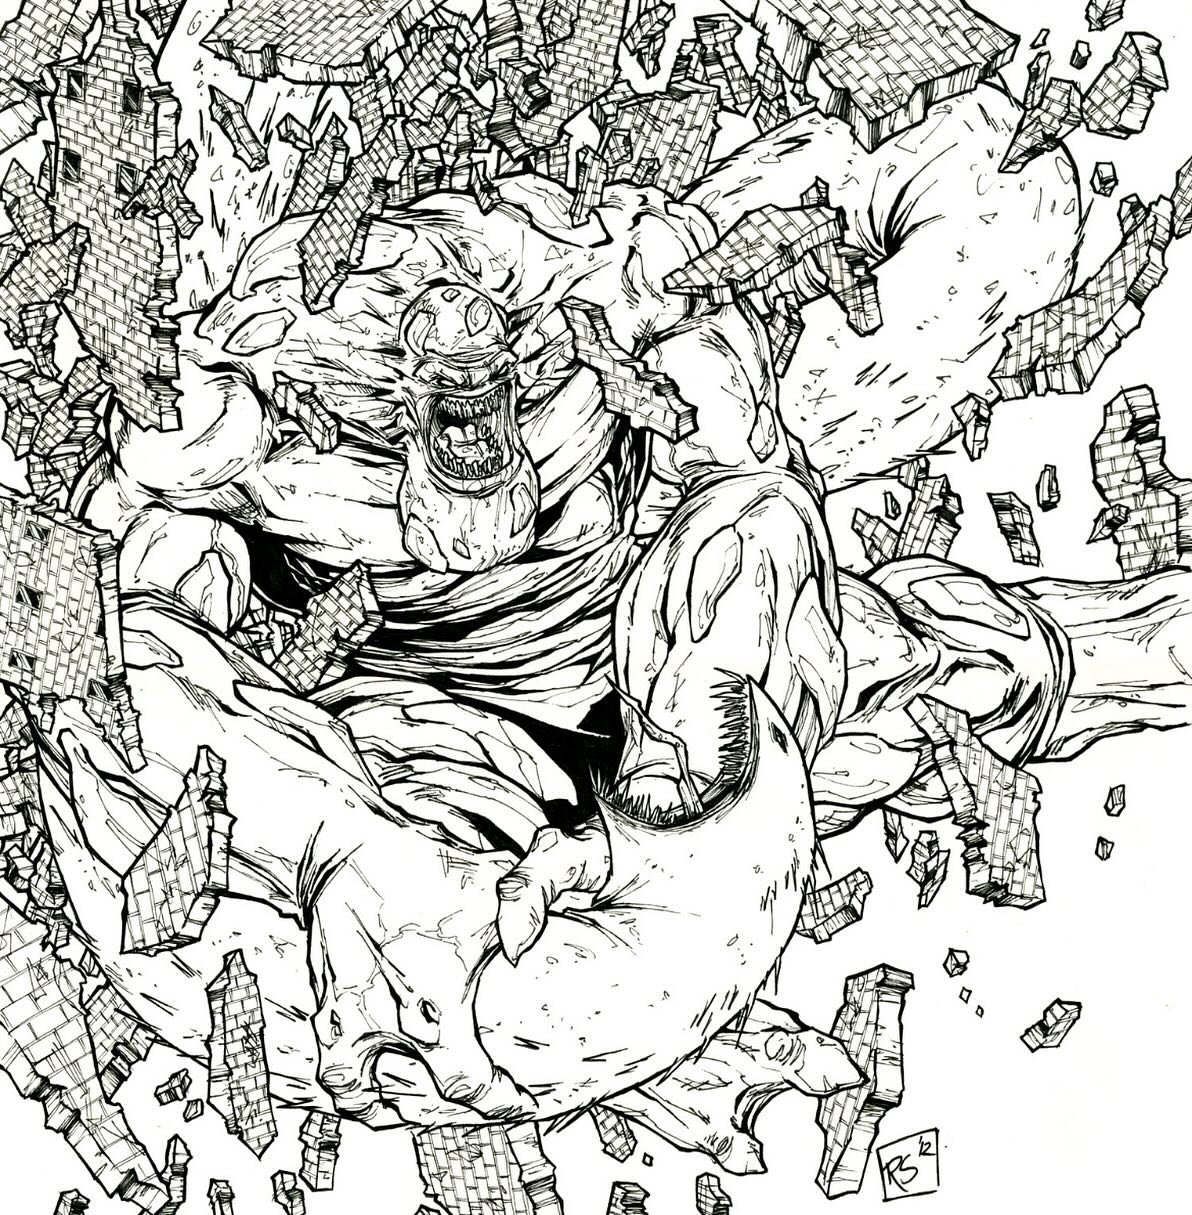 RARE ART from 12 years ago - the uncolored back cover to Kodoja: Terror Mountain Showdown #3, by @rorysmithart !